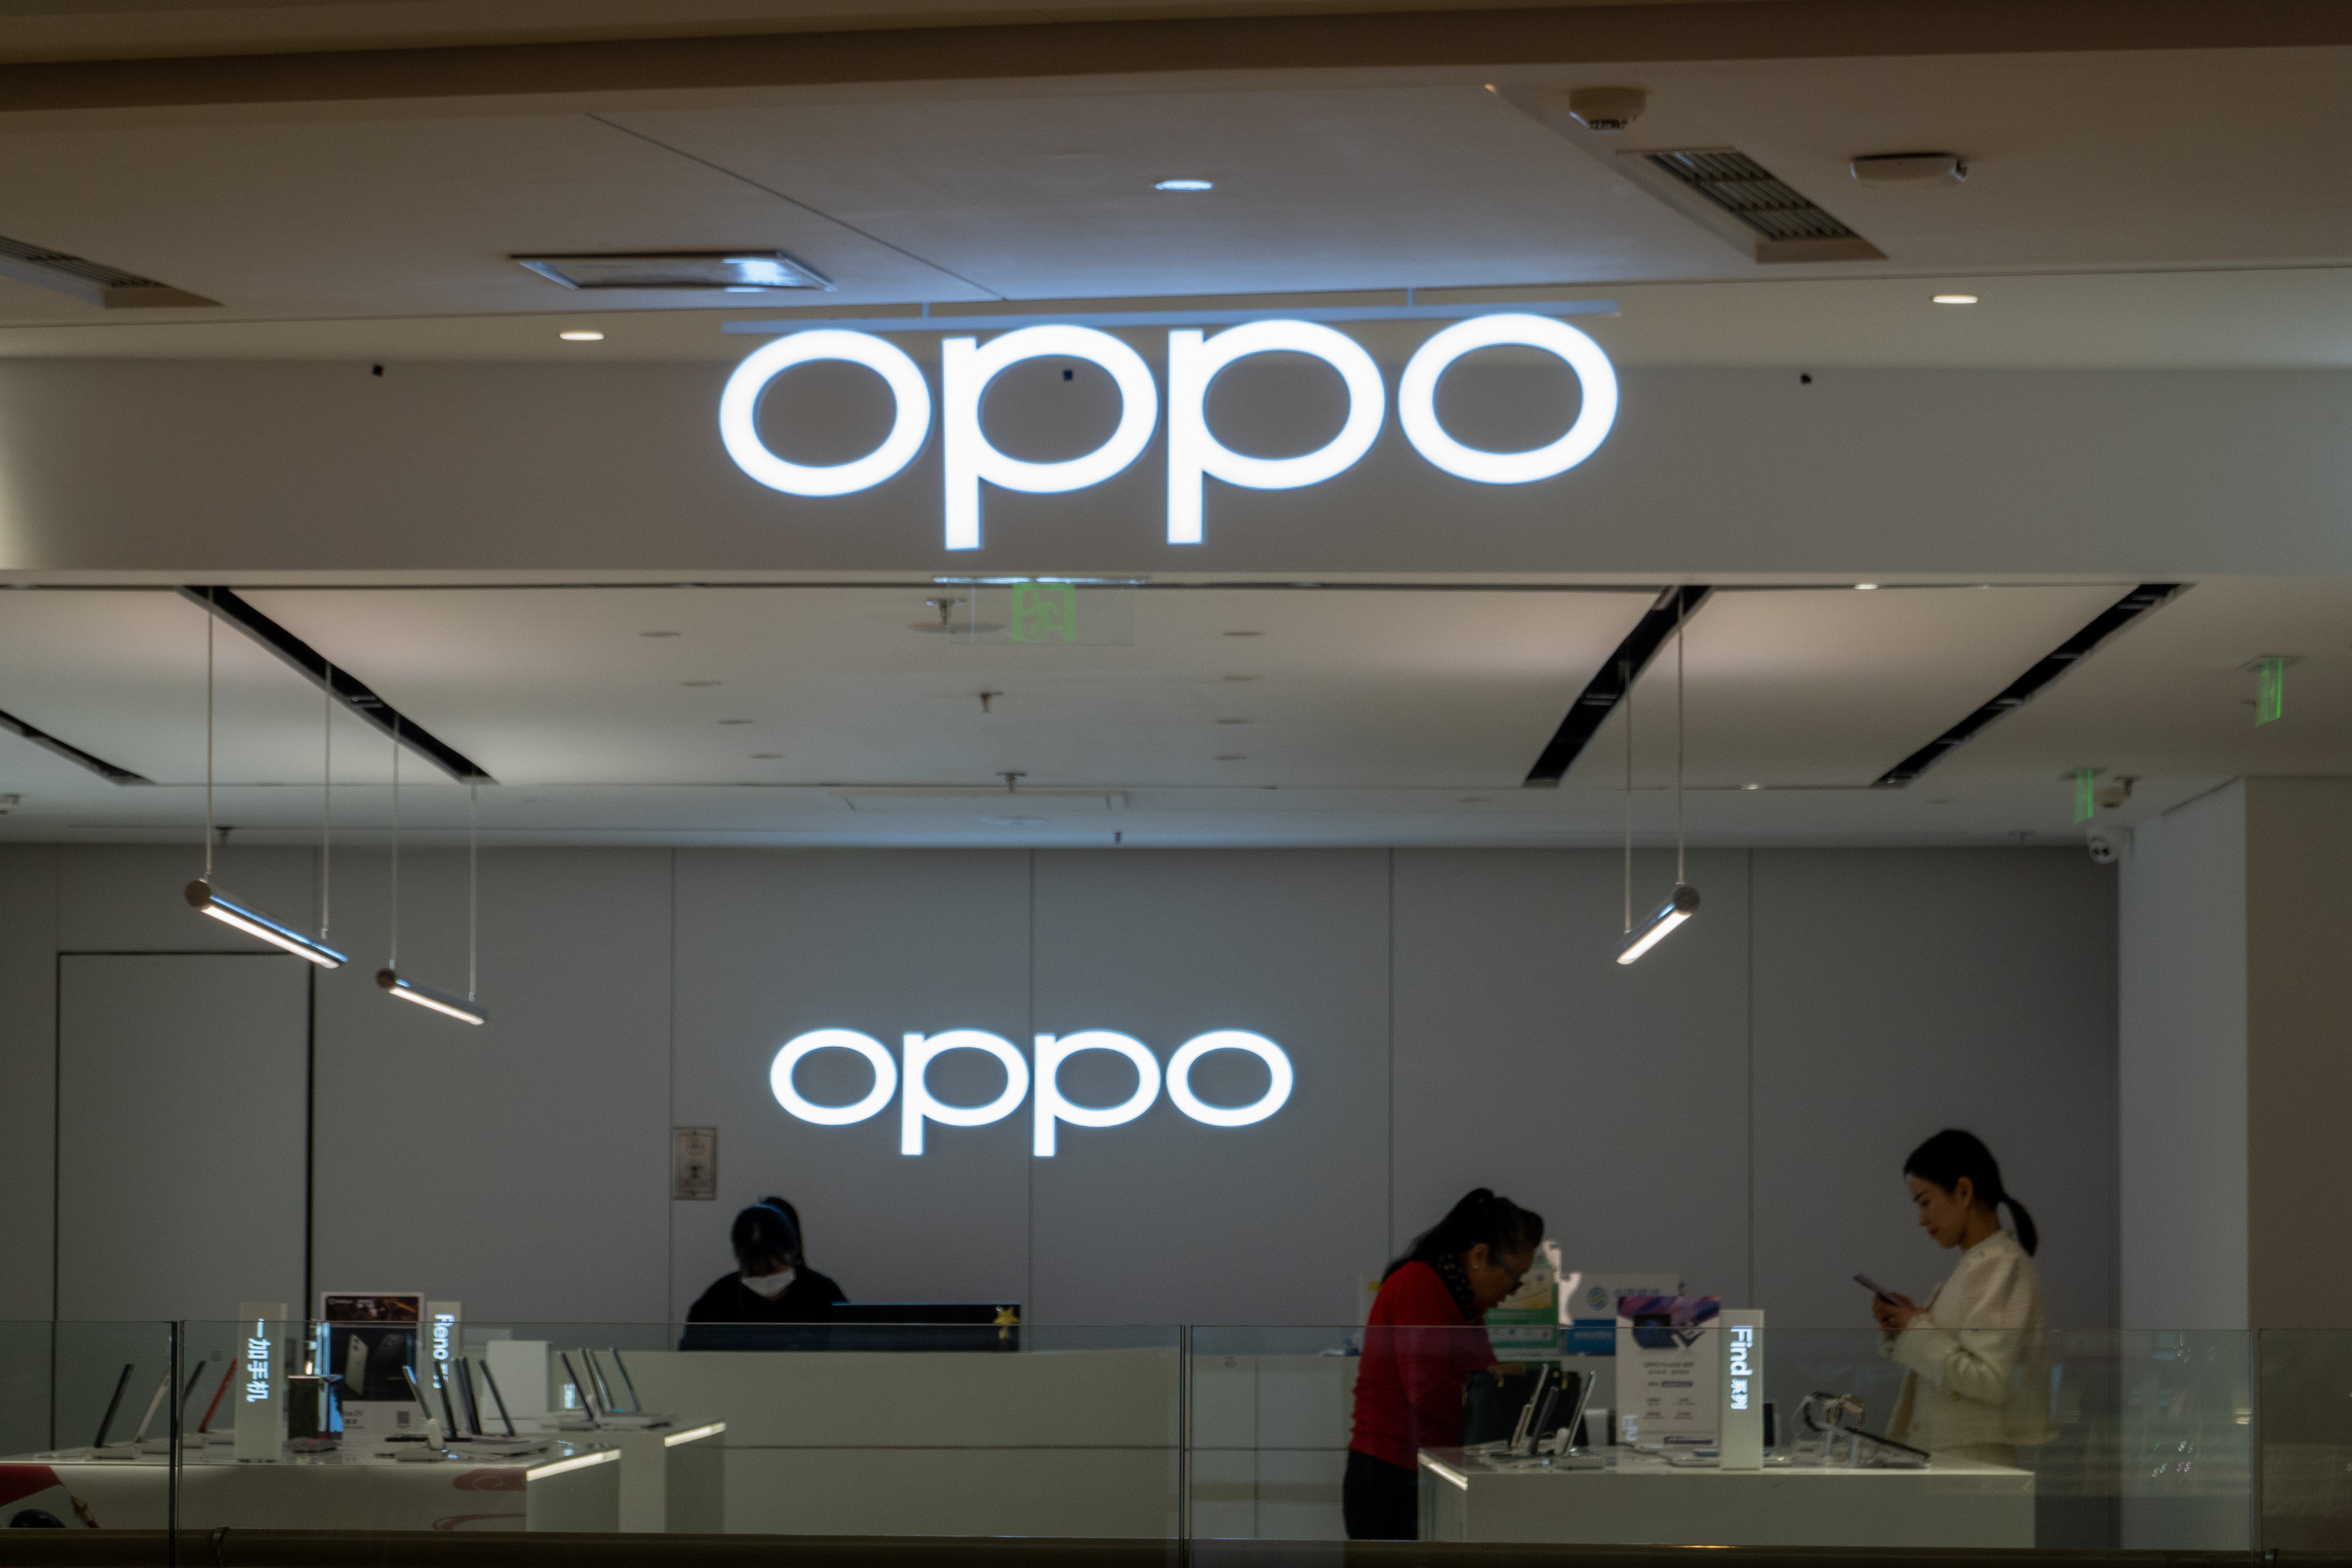 Customers at an Oppo store in Shanghai, China, March 15, 2023. Photo: CFOTO/Future Publishing via Getty Images